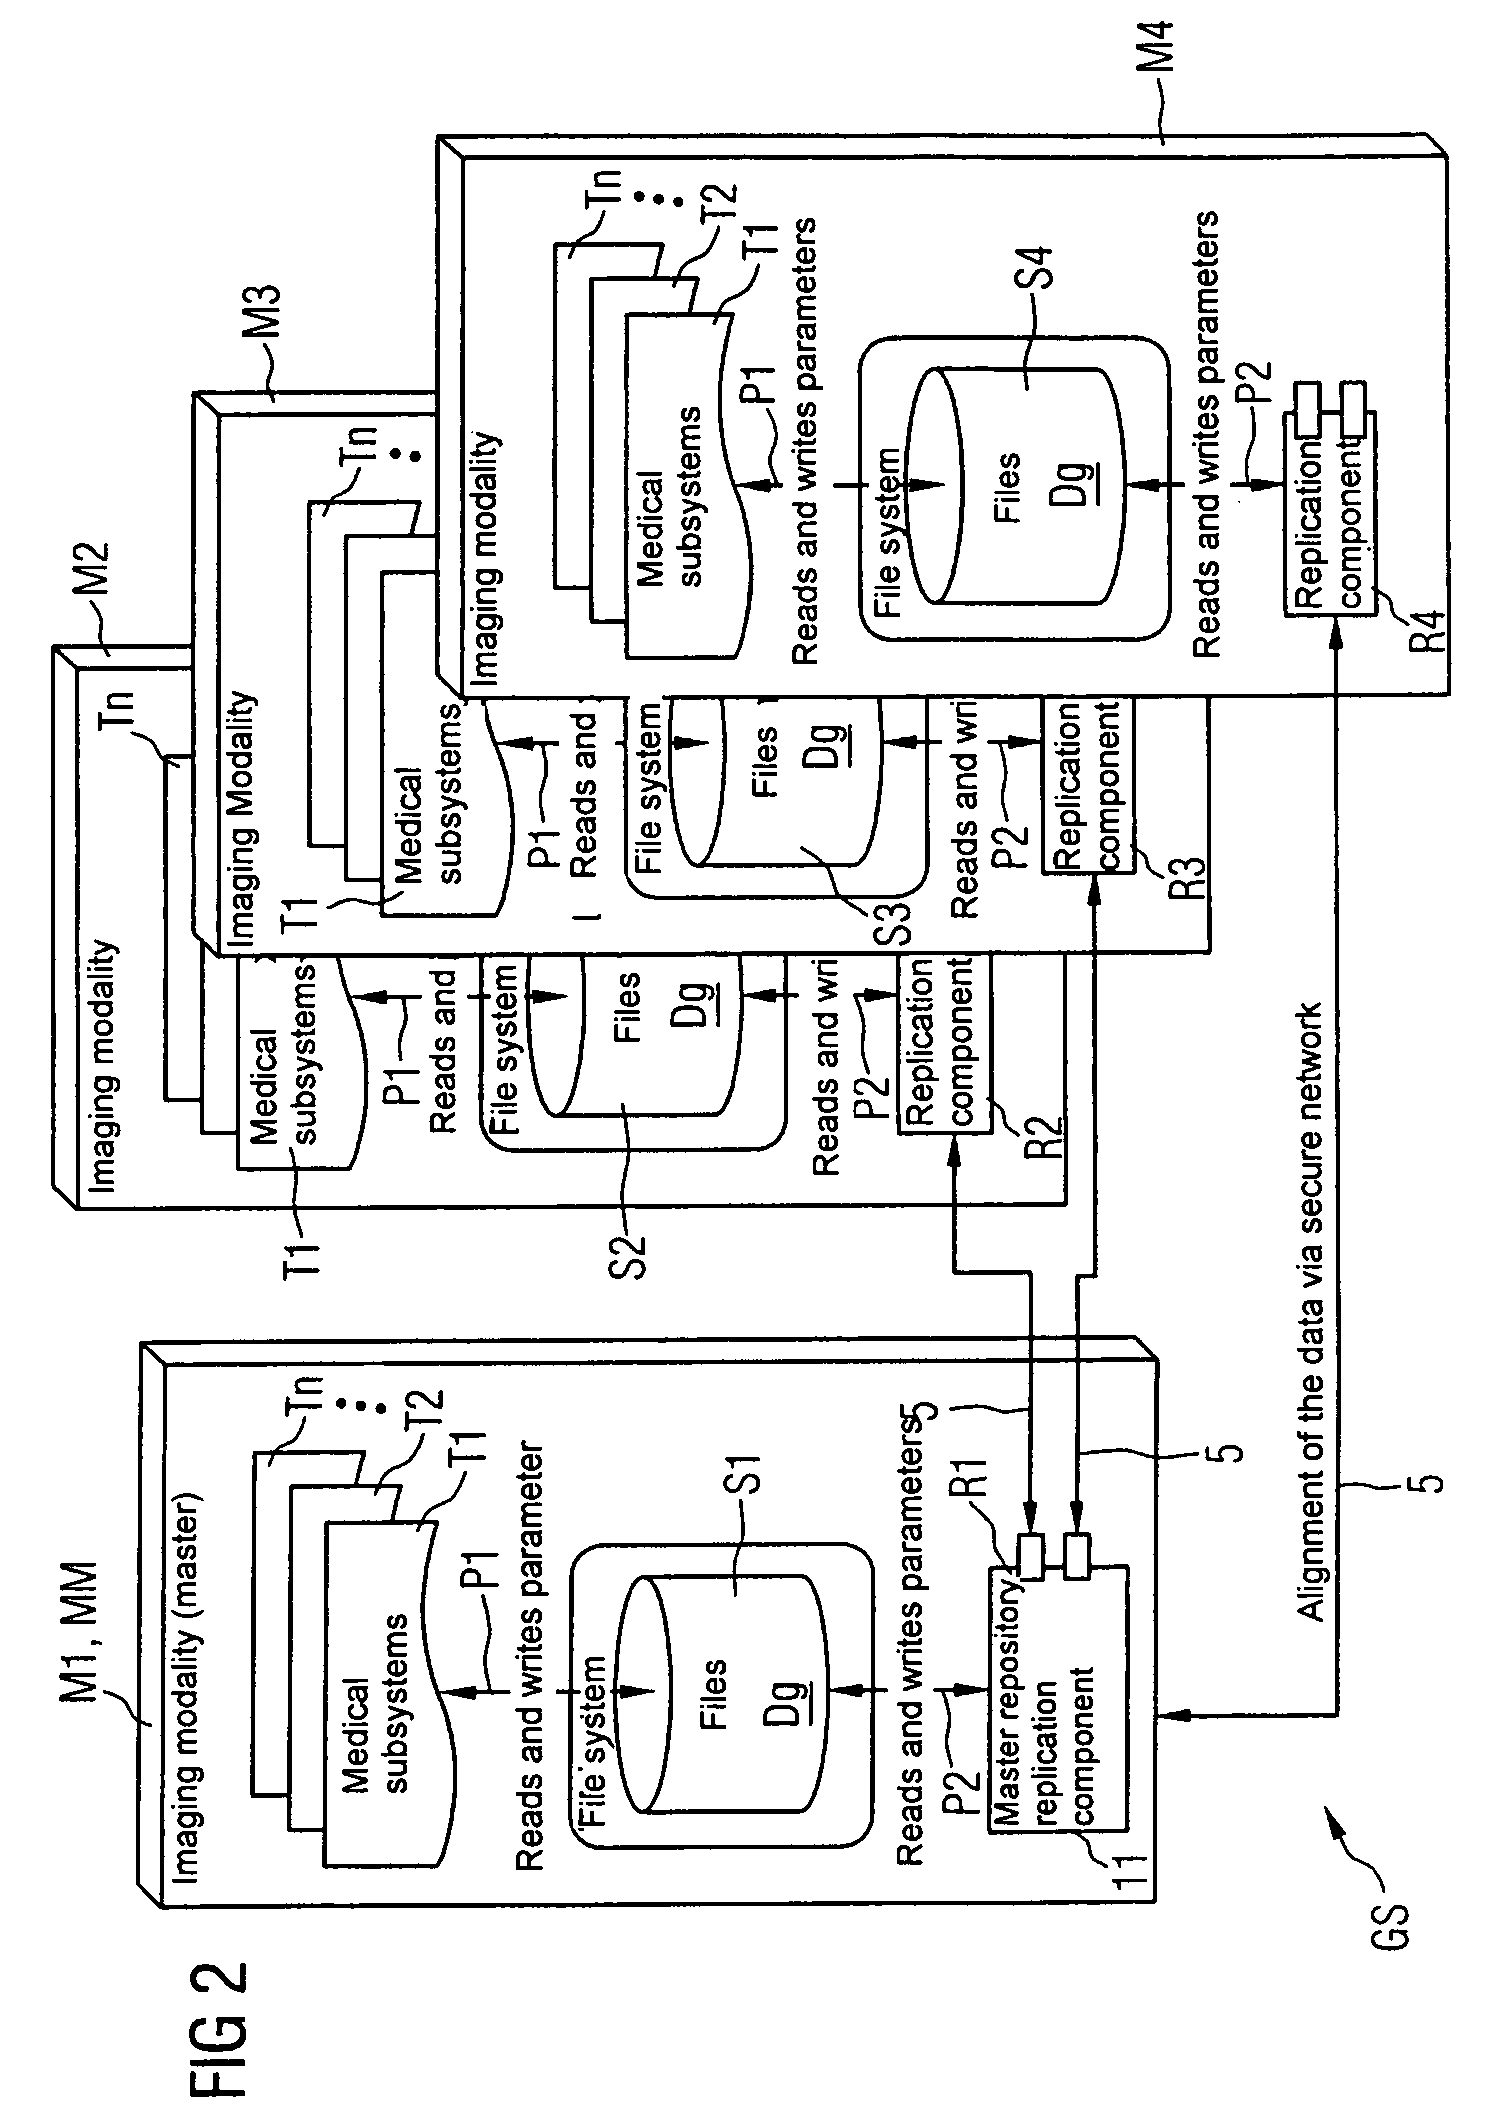 Method and apparatus for processing data, and medical appliance system for processing data